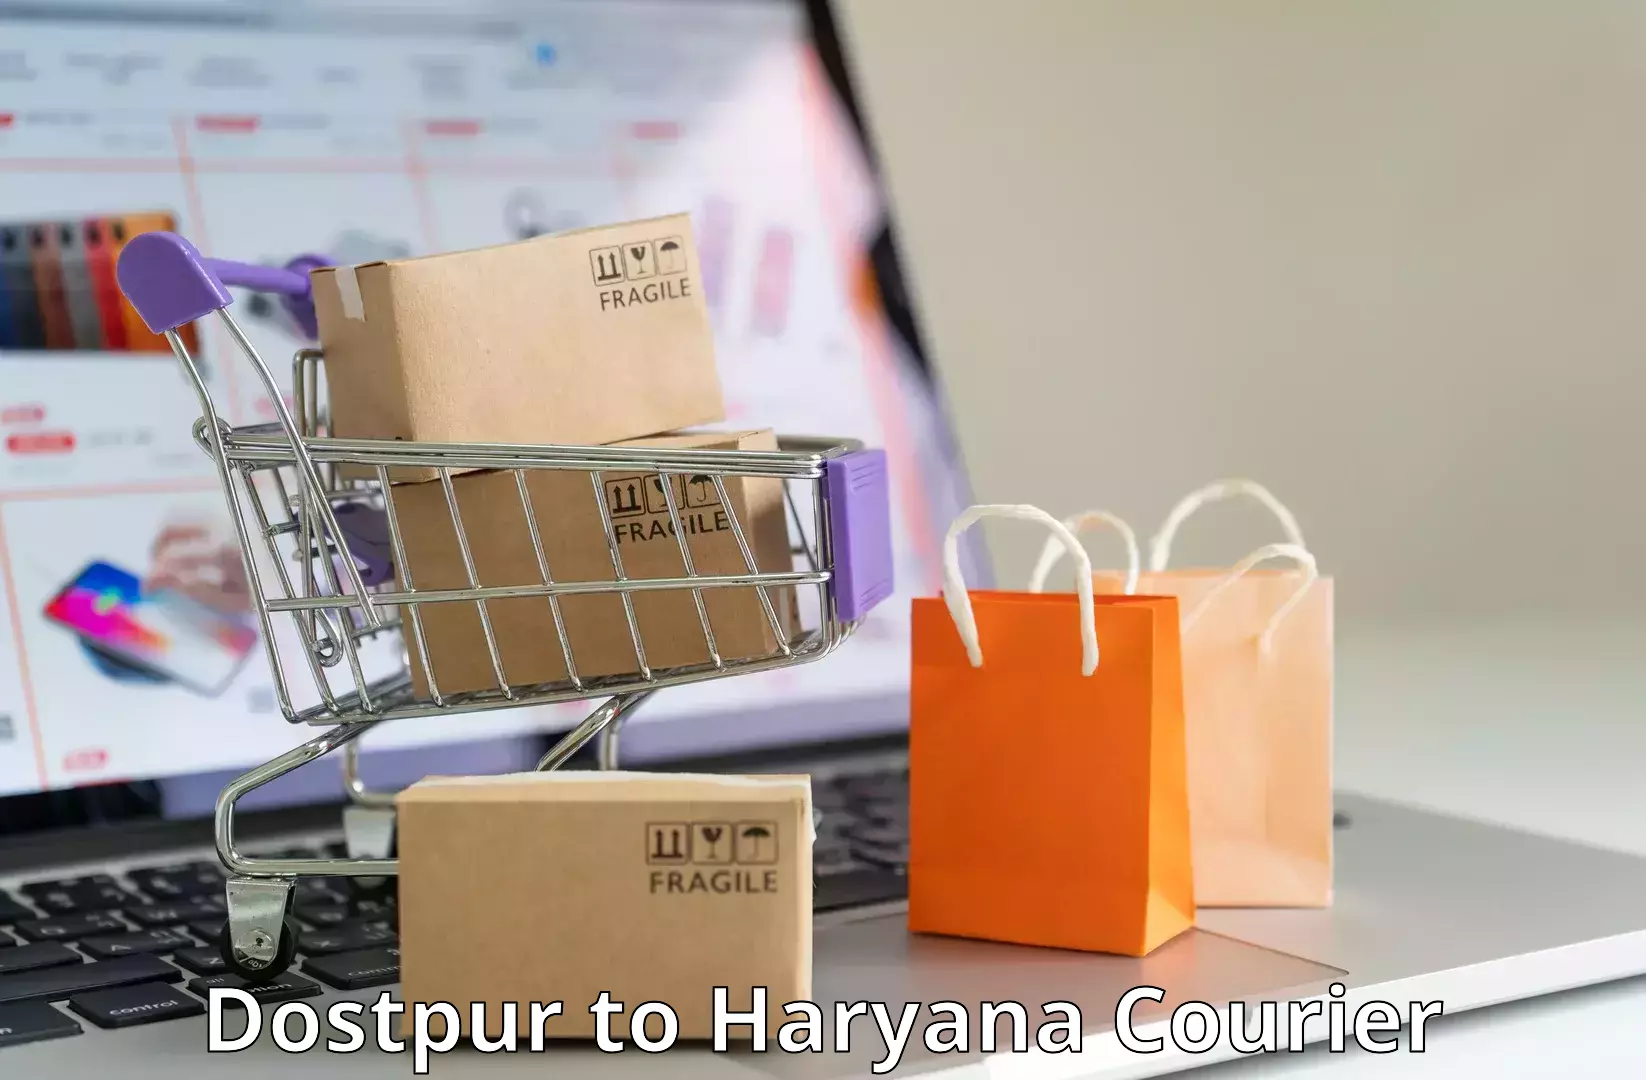 Next day courier Dostpur to Haryana